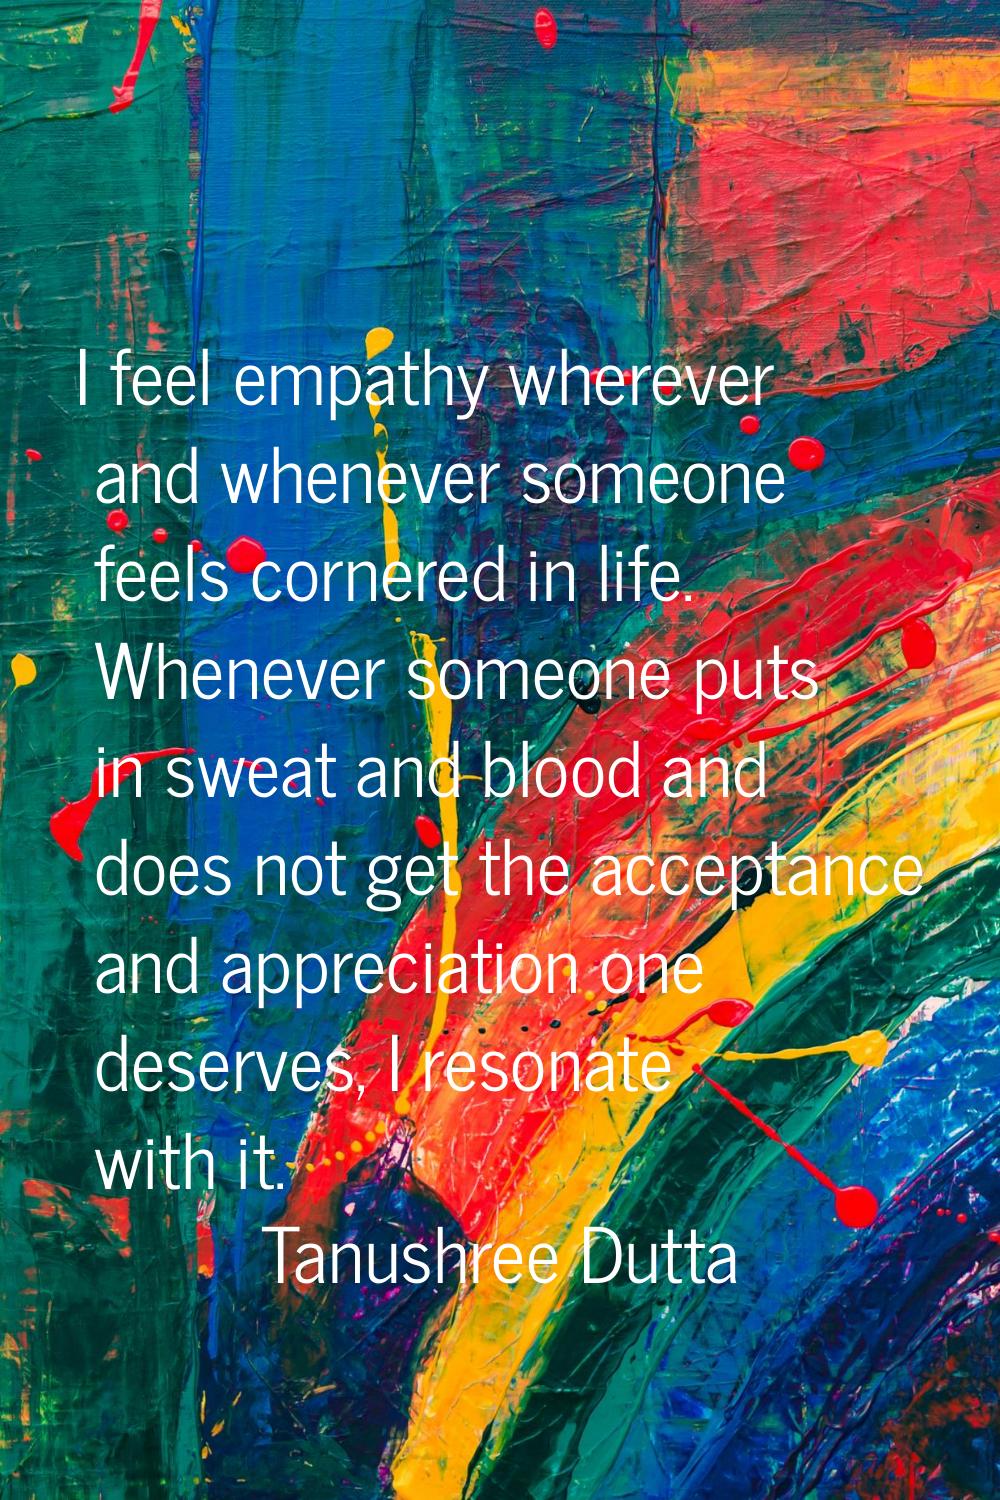 I feel empathy wherever and whenever someone feels cornered in life. Whenever someone puts in sweat